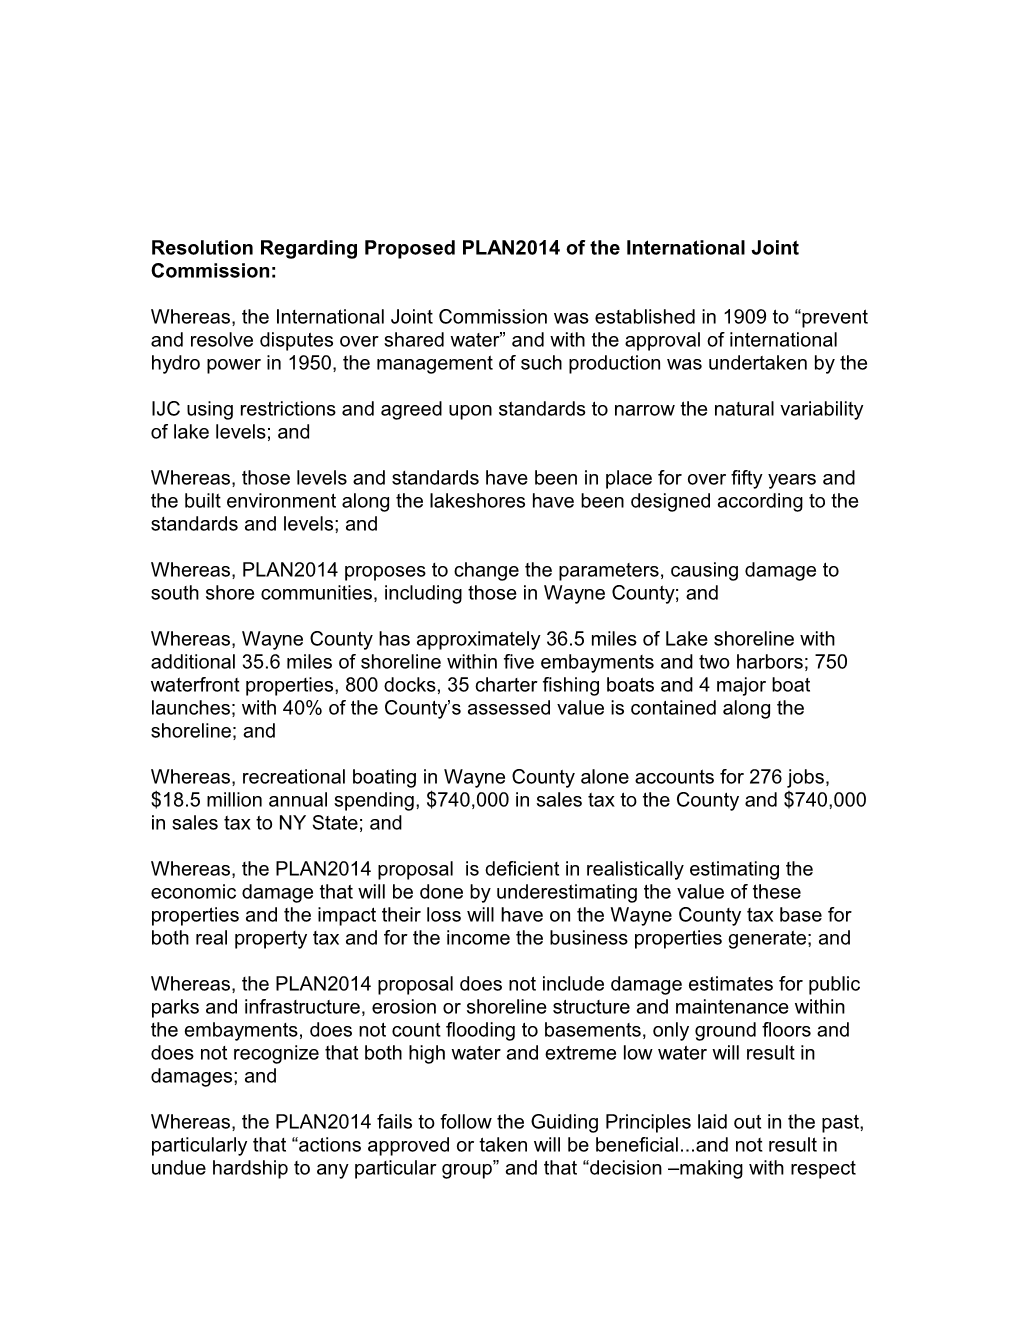 Resolution Regarding Proposed PLAN2014 of the International Joint Commission